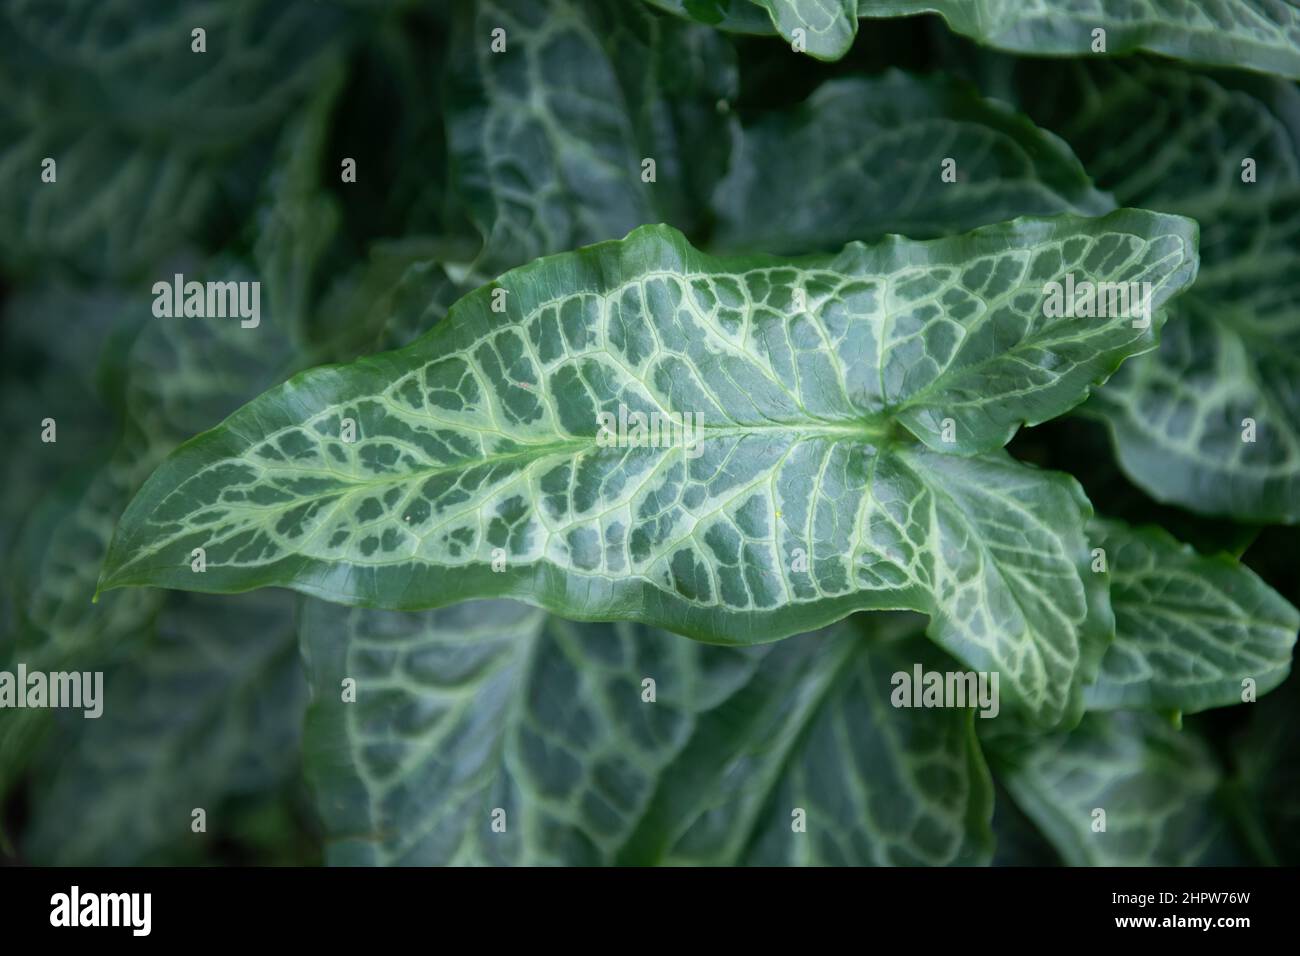 Arum Italicum, flowering herbaceous perennial plant. (Italian Arum) Leaves only. Jersey, Channel Islands. Stock Photo